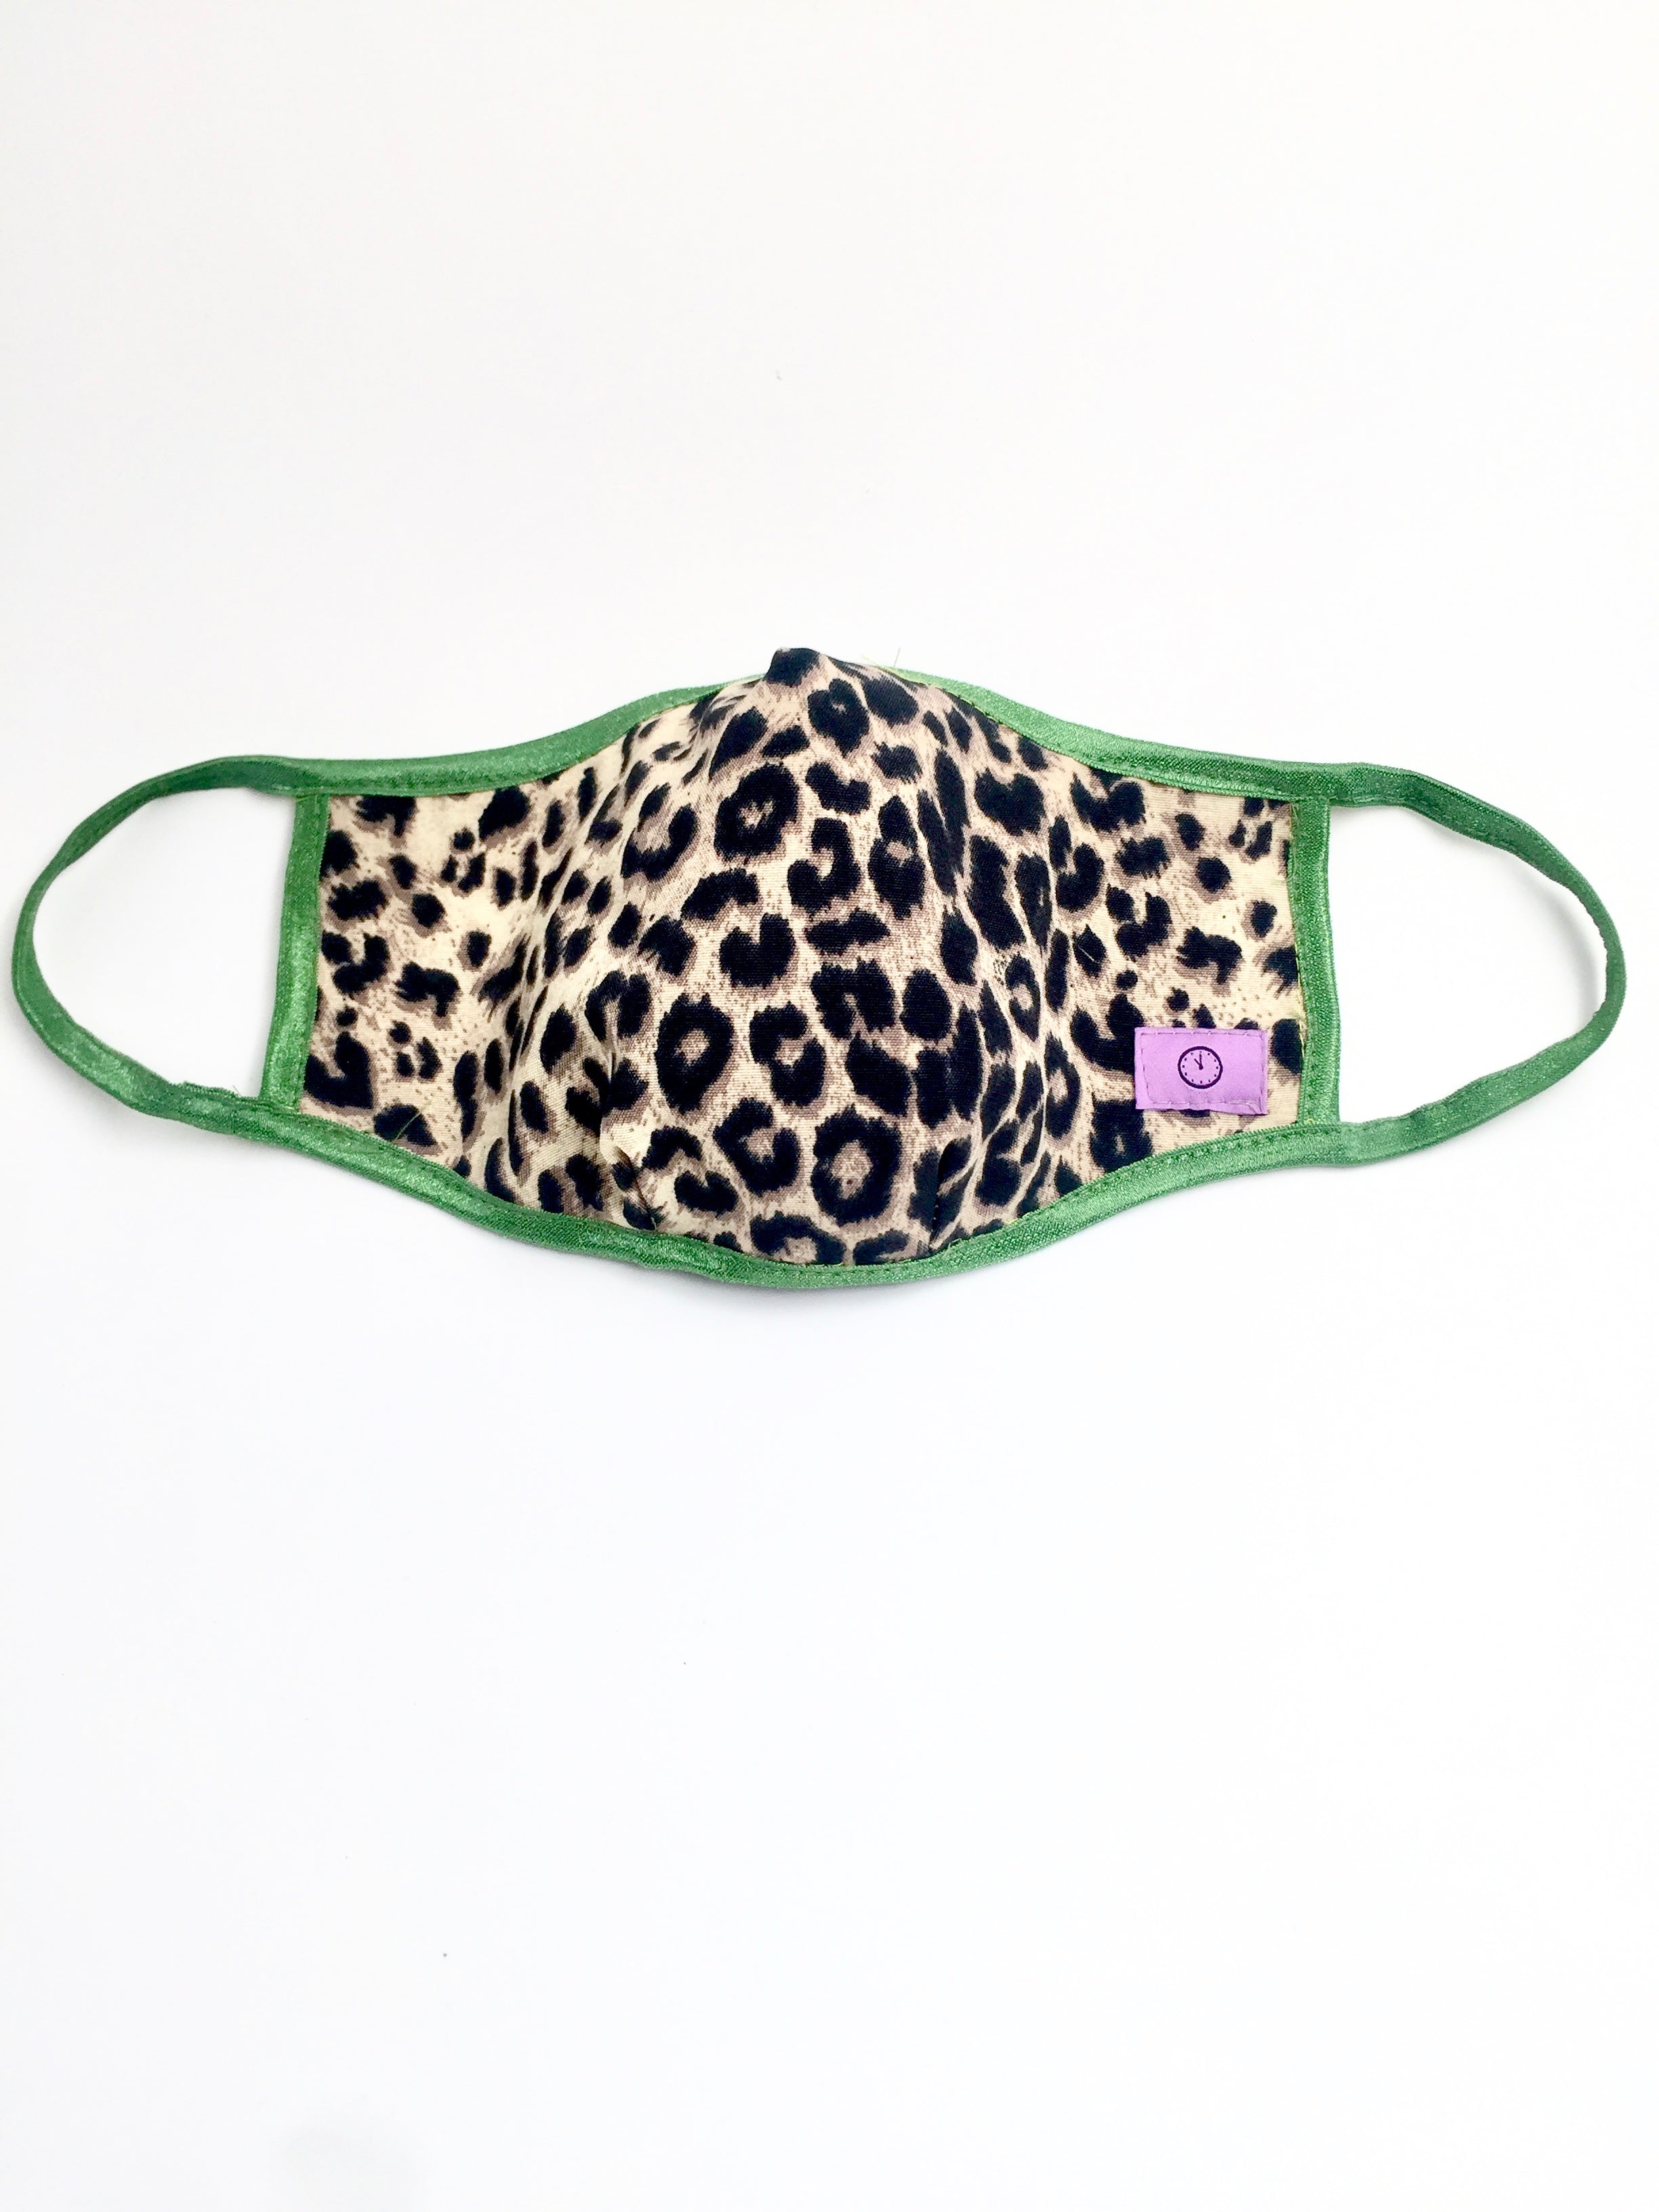 Cozy Child Leopard Stretch Mask with green piping